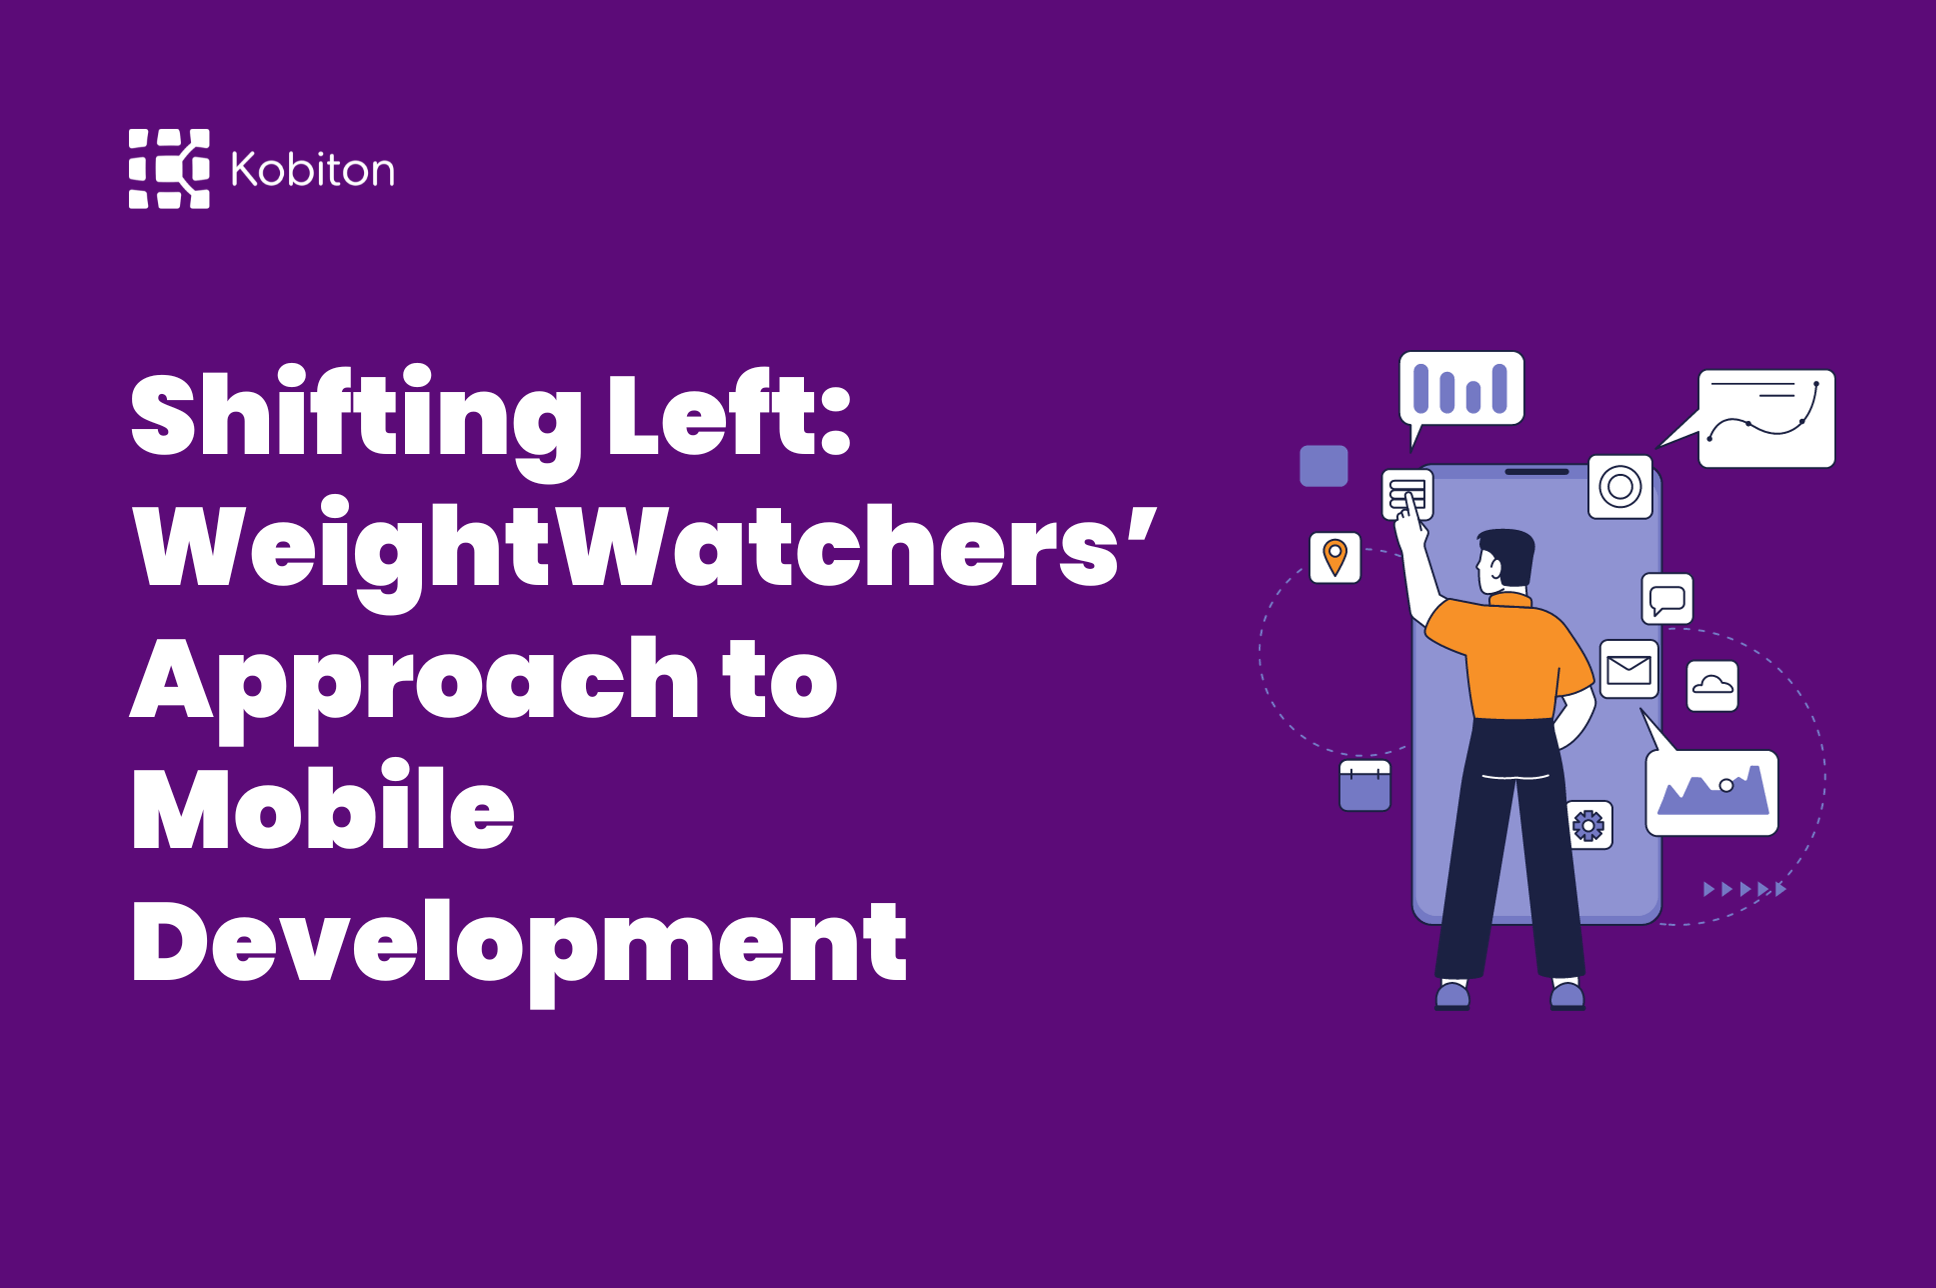 Shifting Left WeightWatchers’ Approach to Mobile Development